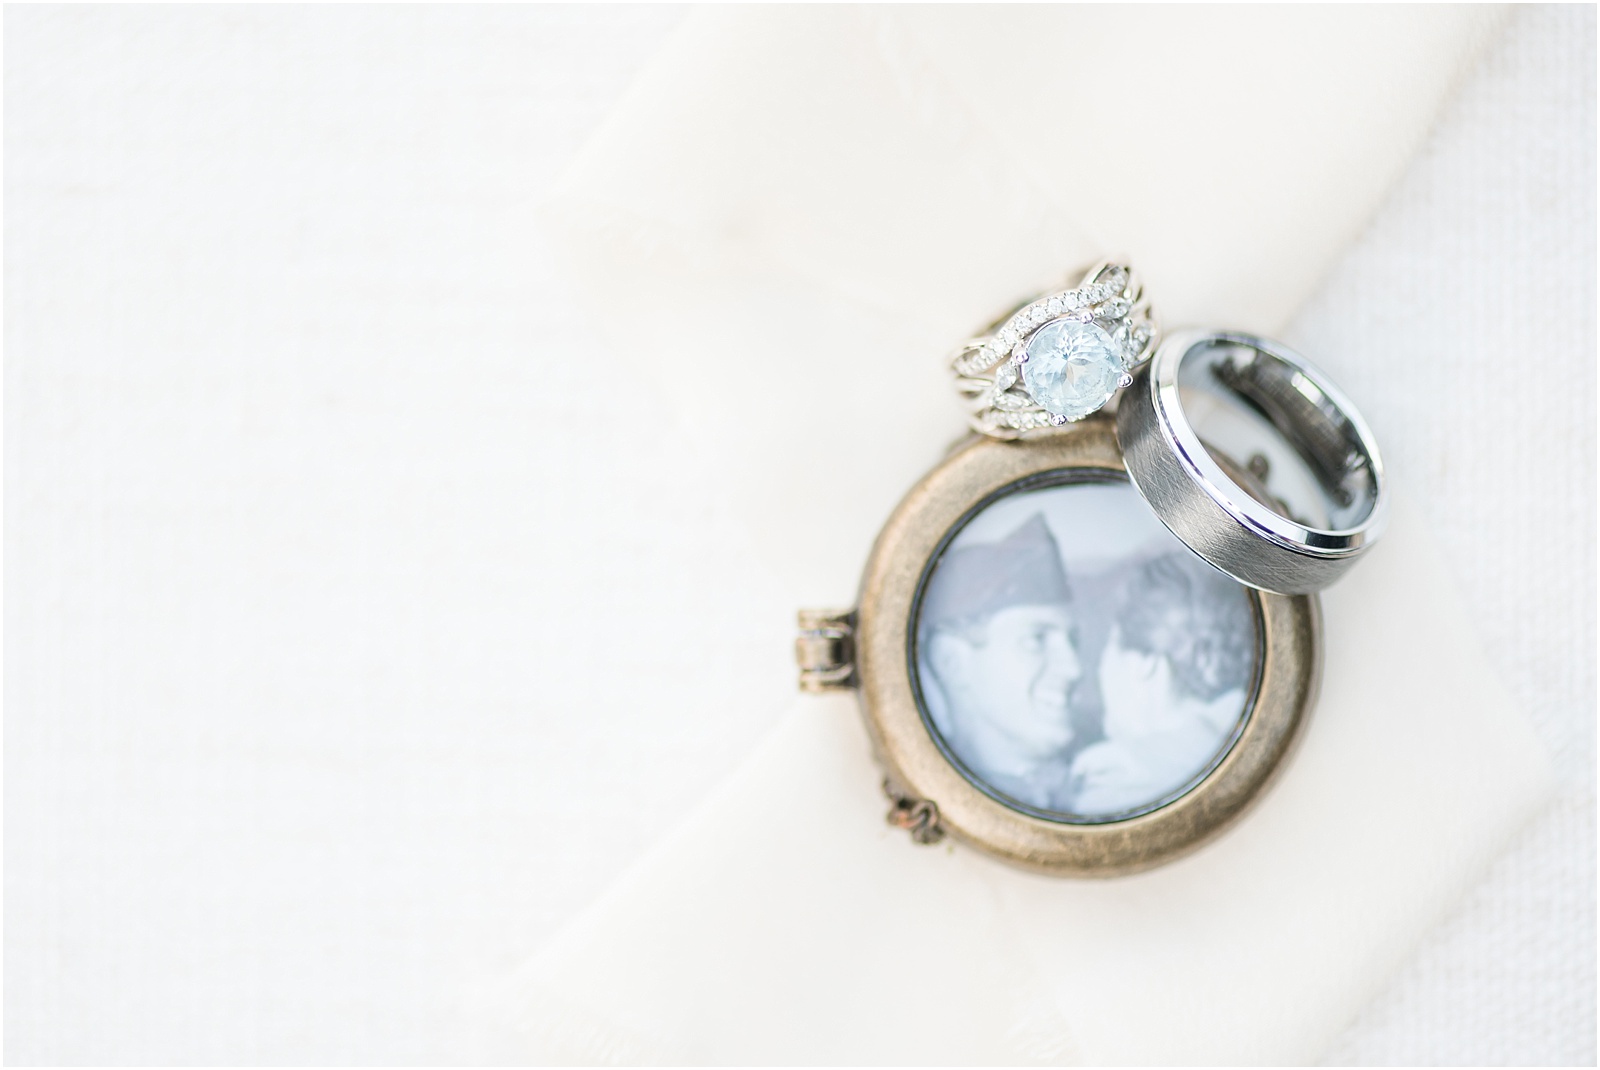 a blue stoned wedding ring sitting next to a sliver wedding band on top of a locket with an old photograph inside on top of a beige background